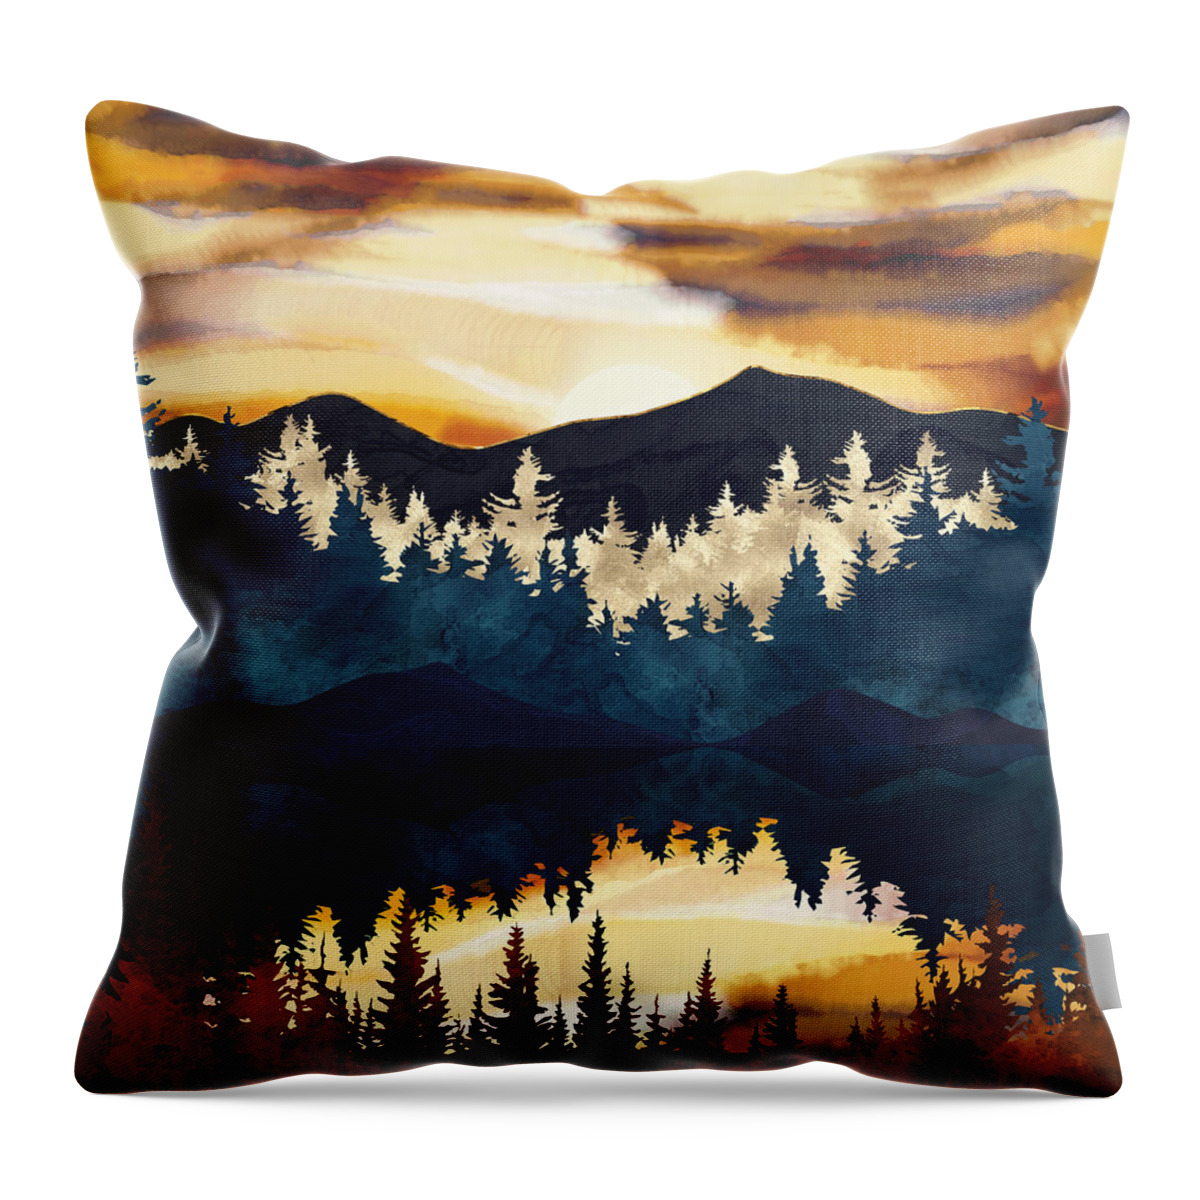 Fall Throw Pillow featuring the digital art Fall Sunset by Spacefrog Designs